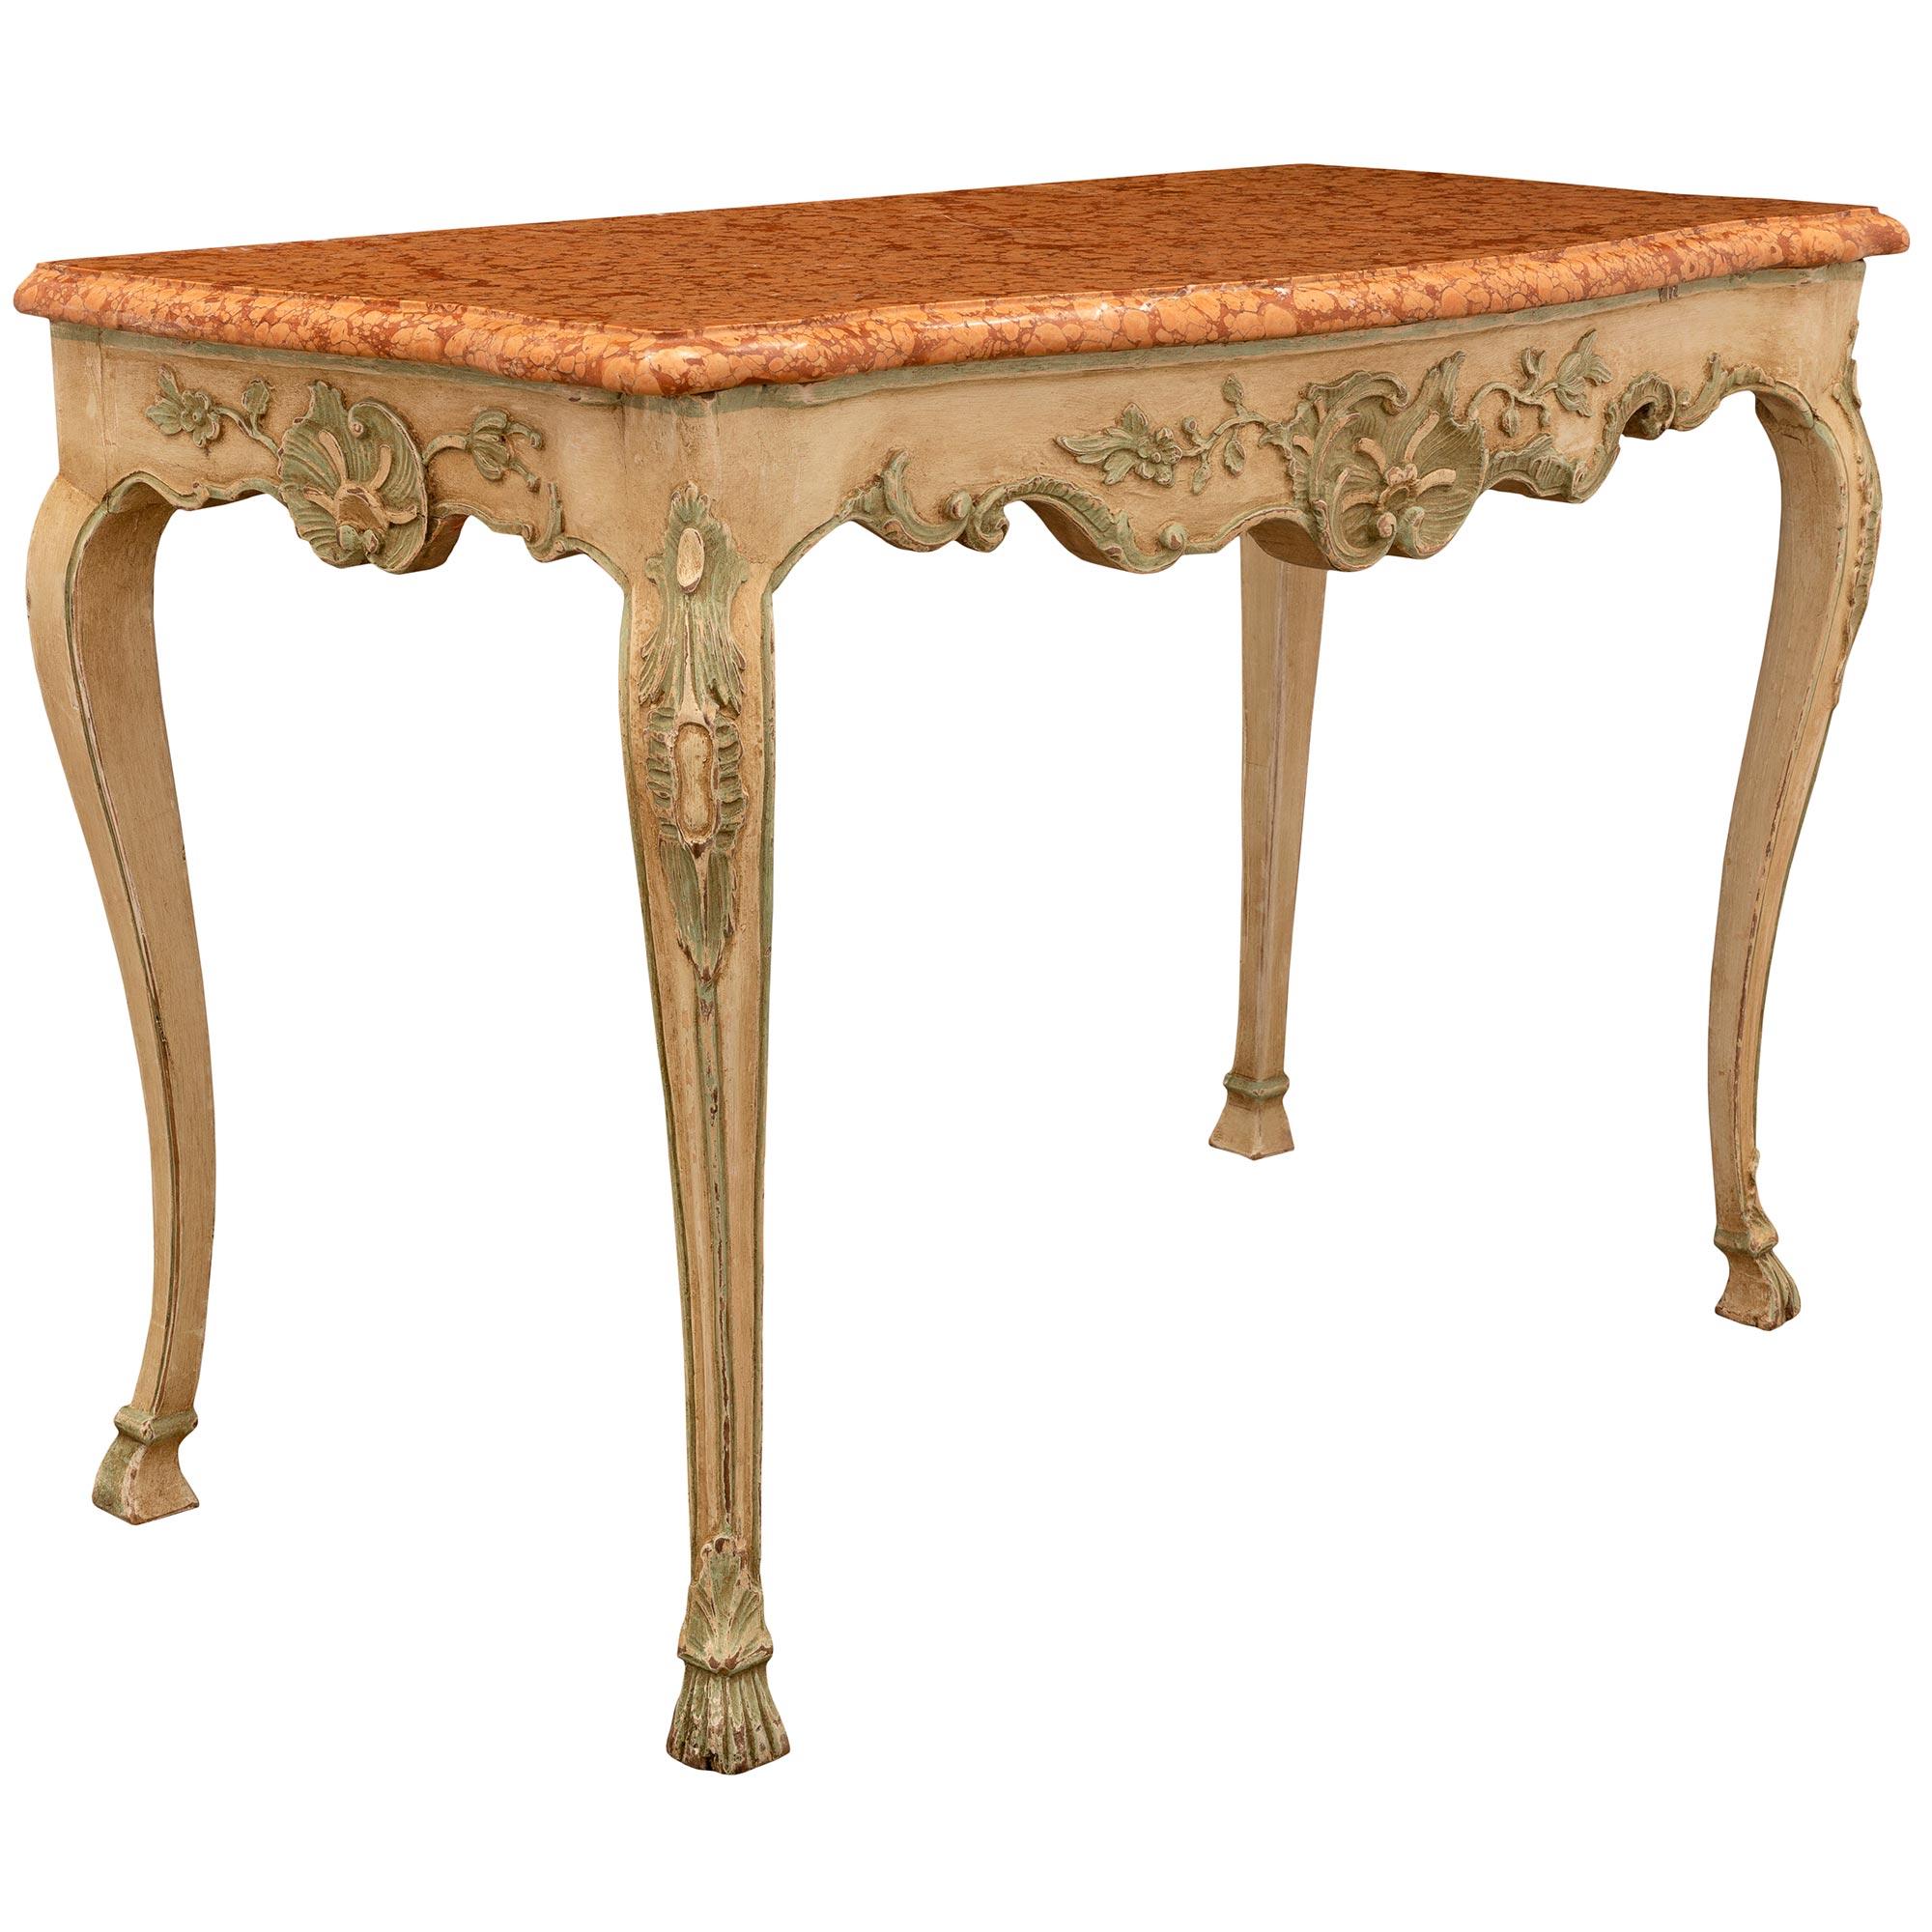 French 18th Century Louis XV Period Patinated Wood and Marble Console In Good Condition For Sale In West Palm Beach, FL